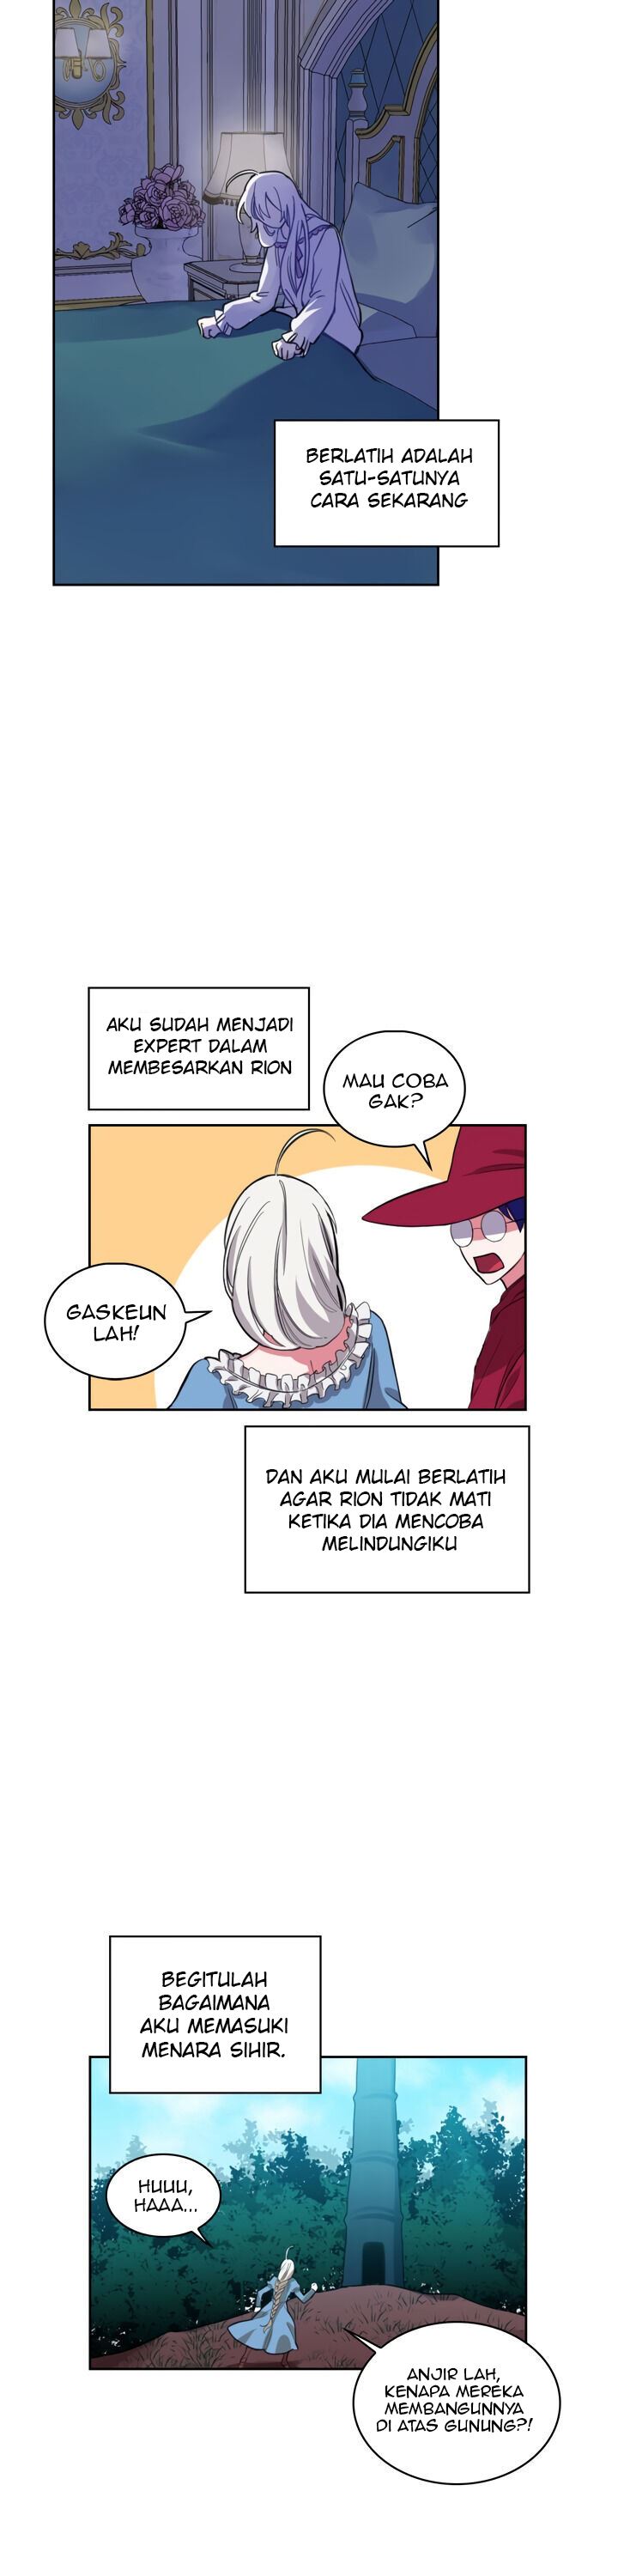 KomiknTouch My Little Brother and You’re Dead Chapter 1